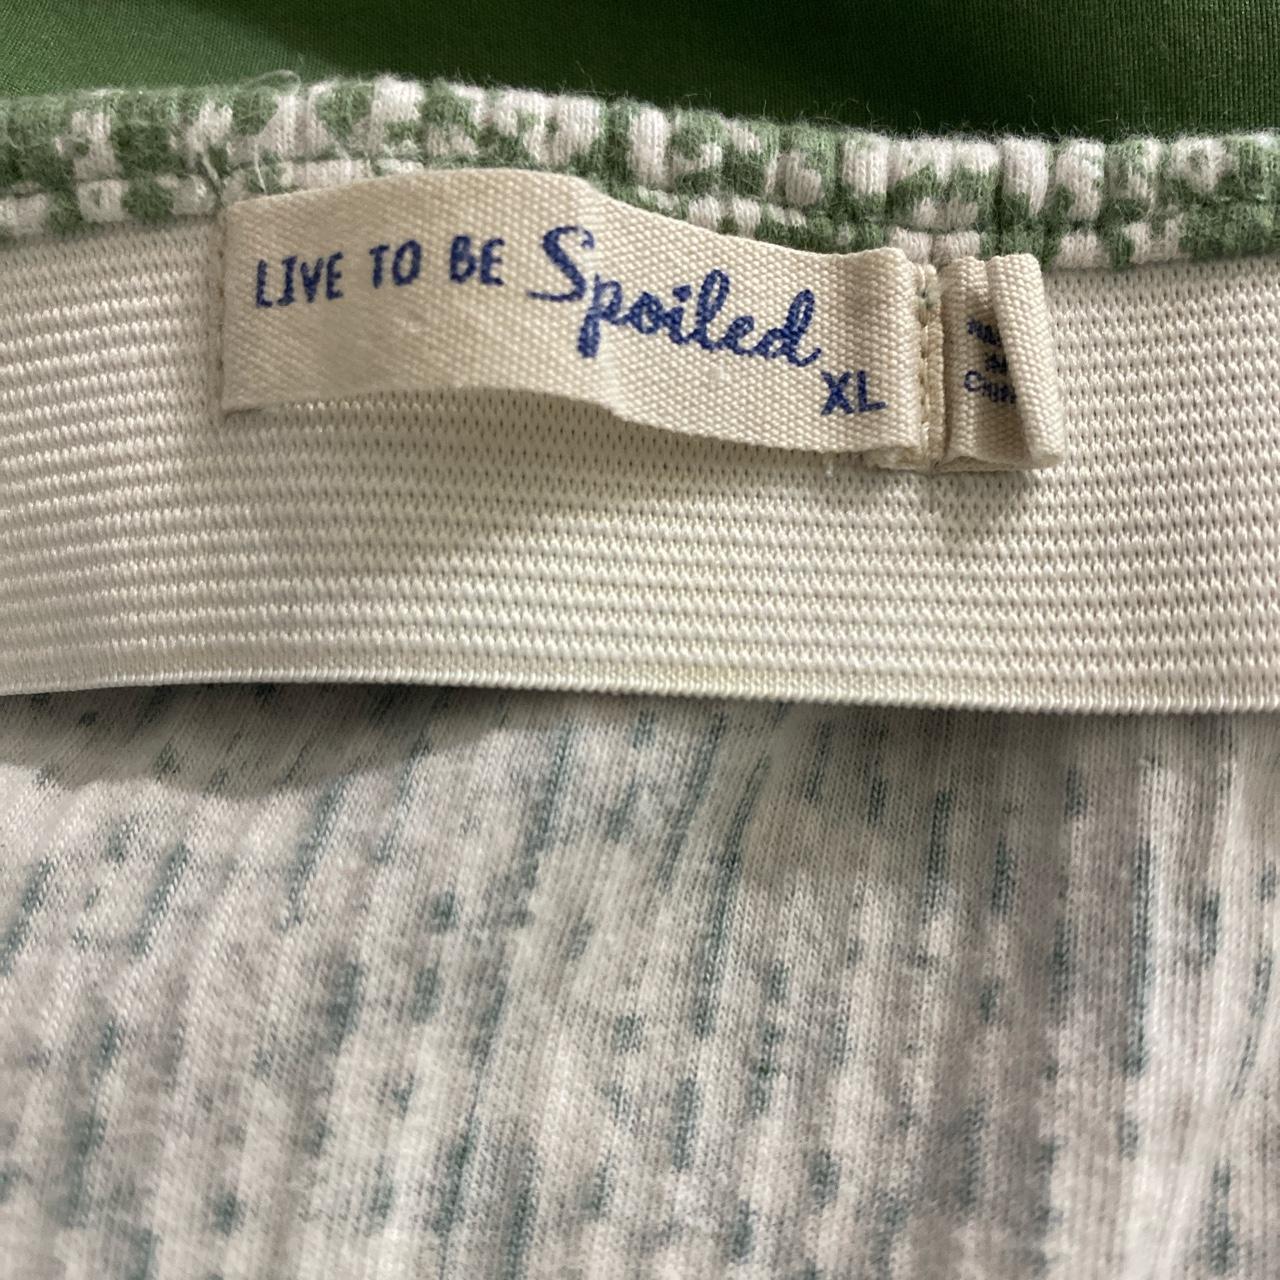 Live To Be Spoiled Women's White and Green Skirt (3)